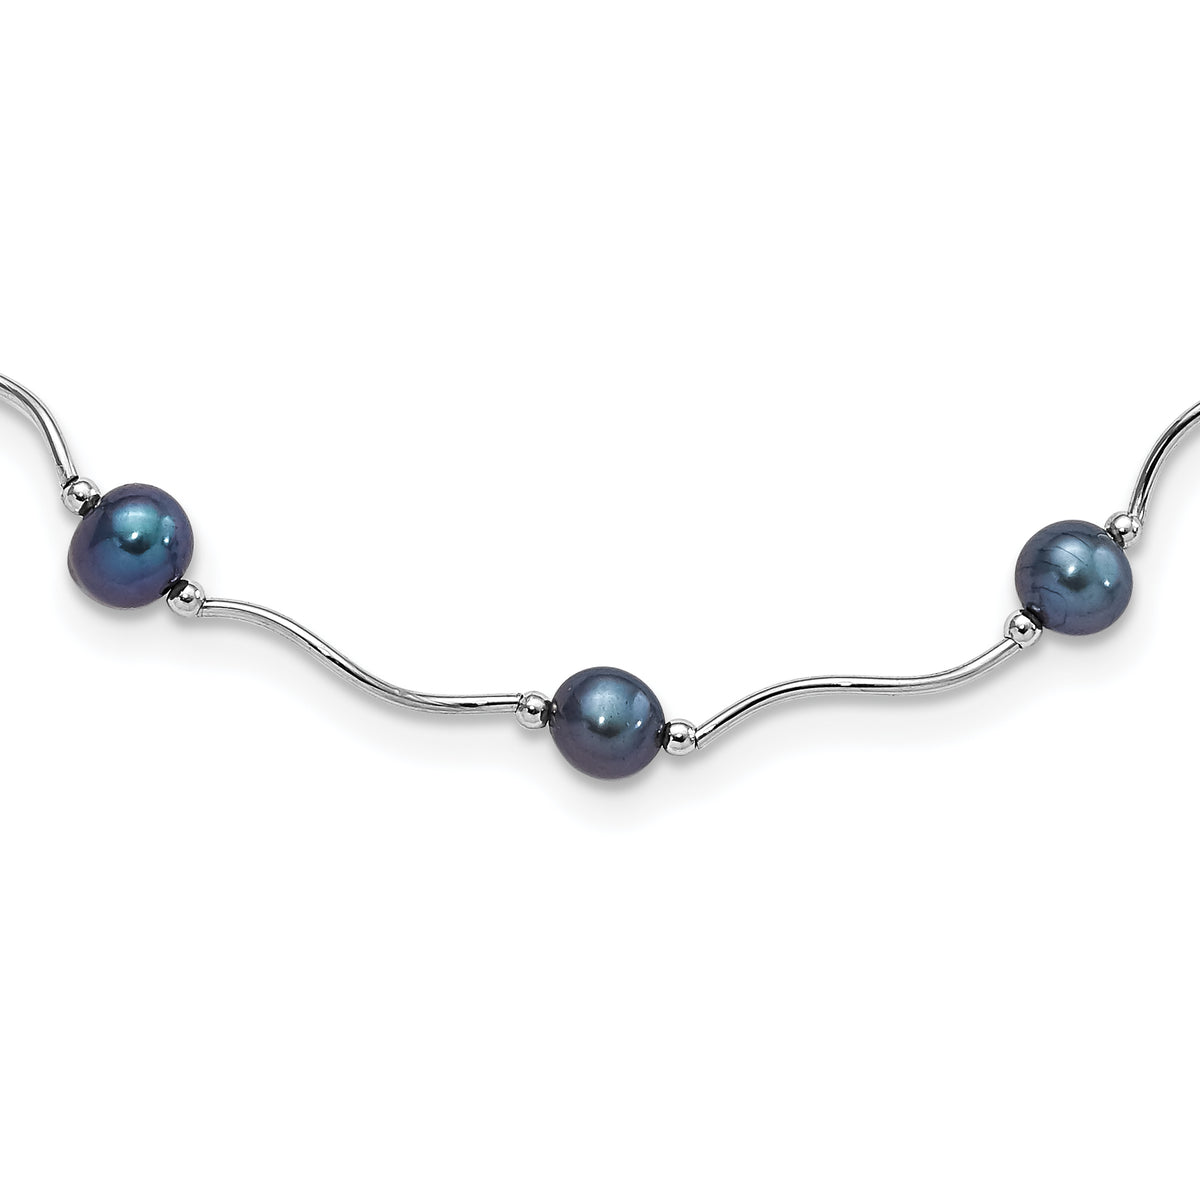 Sterling Silver Rh-plated 6-7mm Black FW Cultured Pearl Necklace